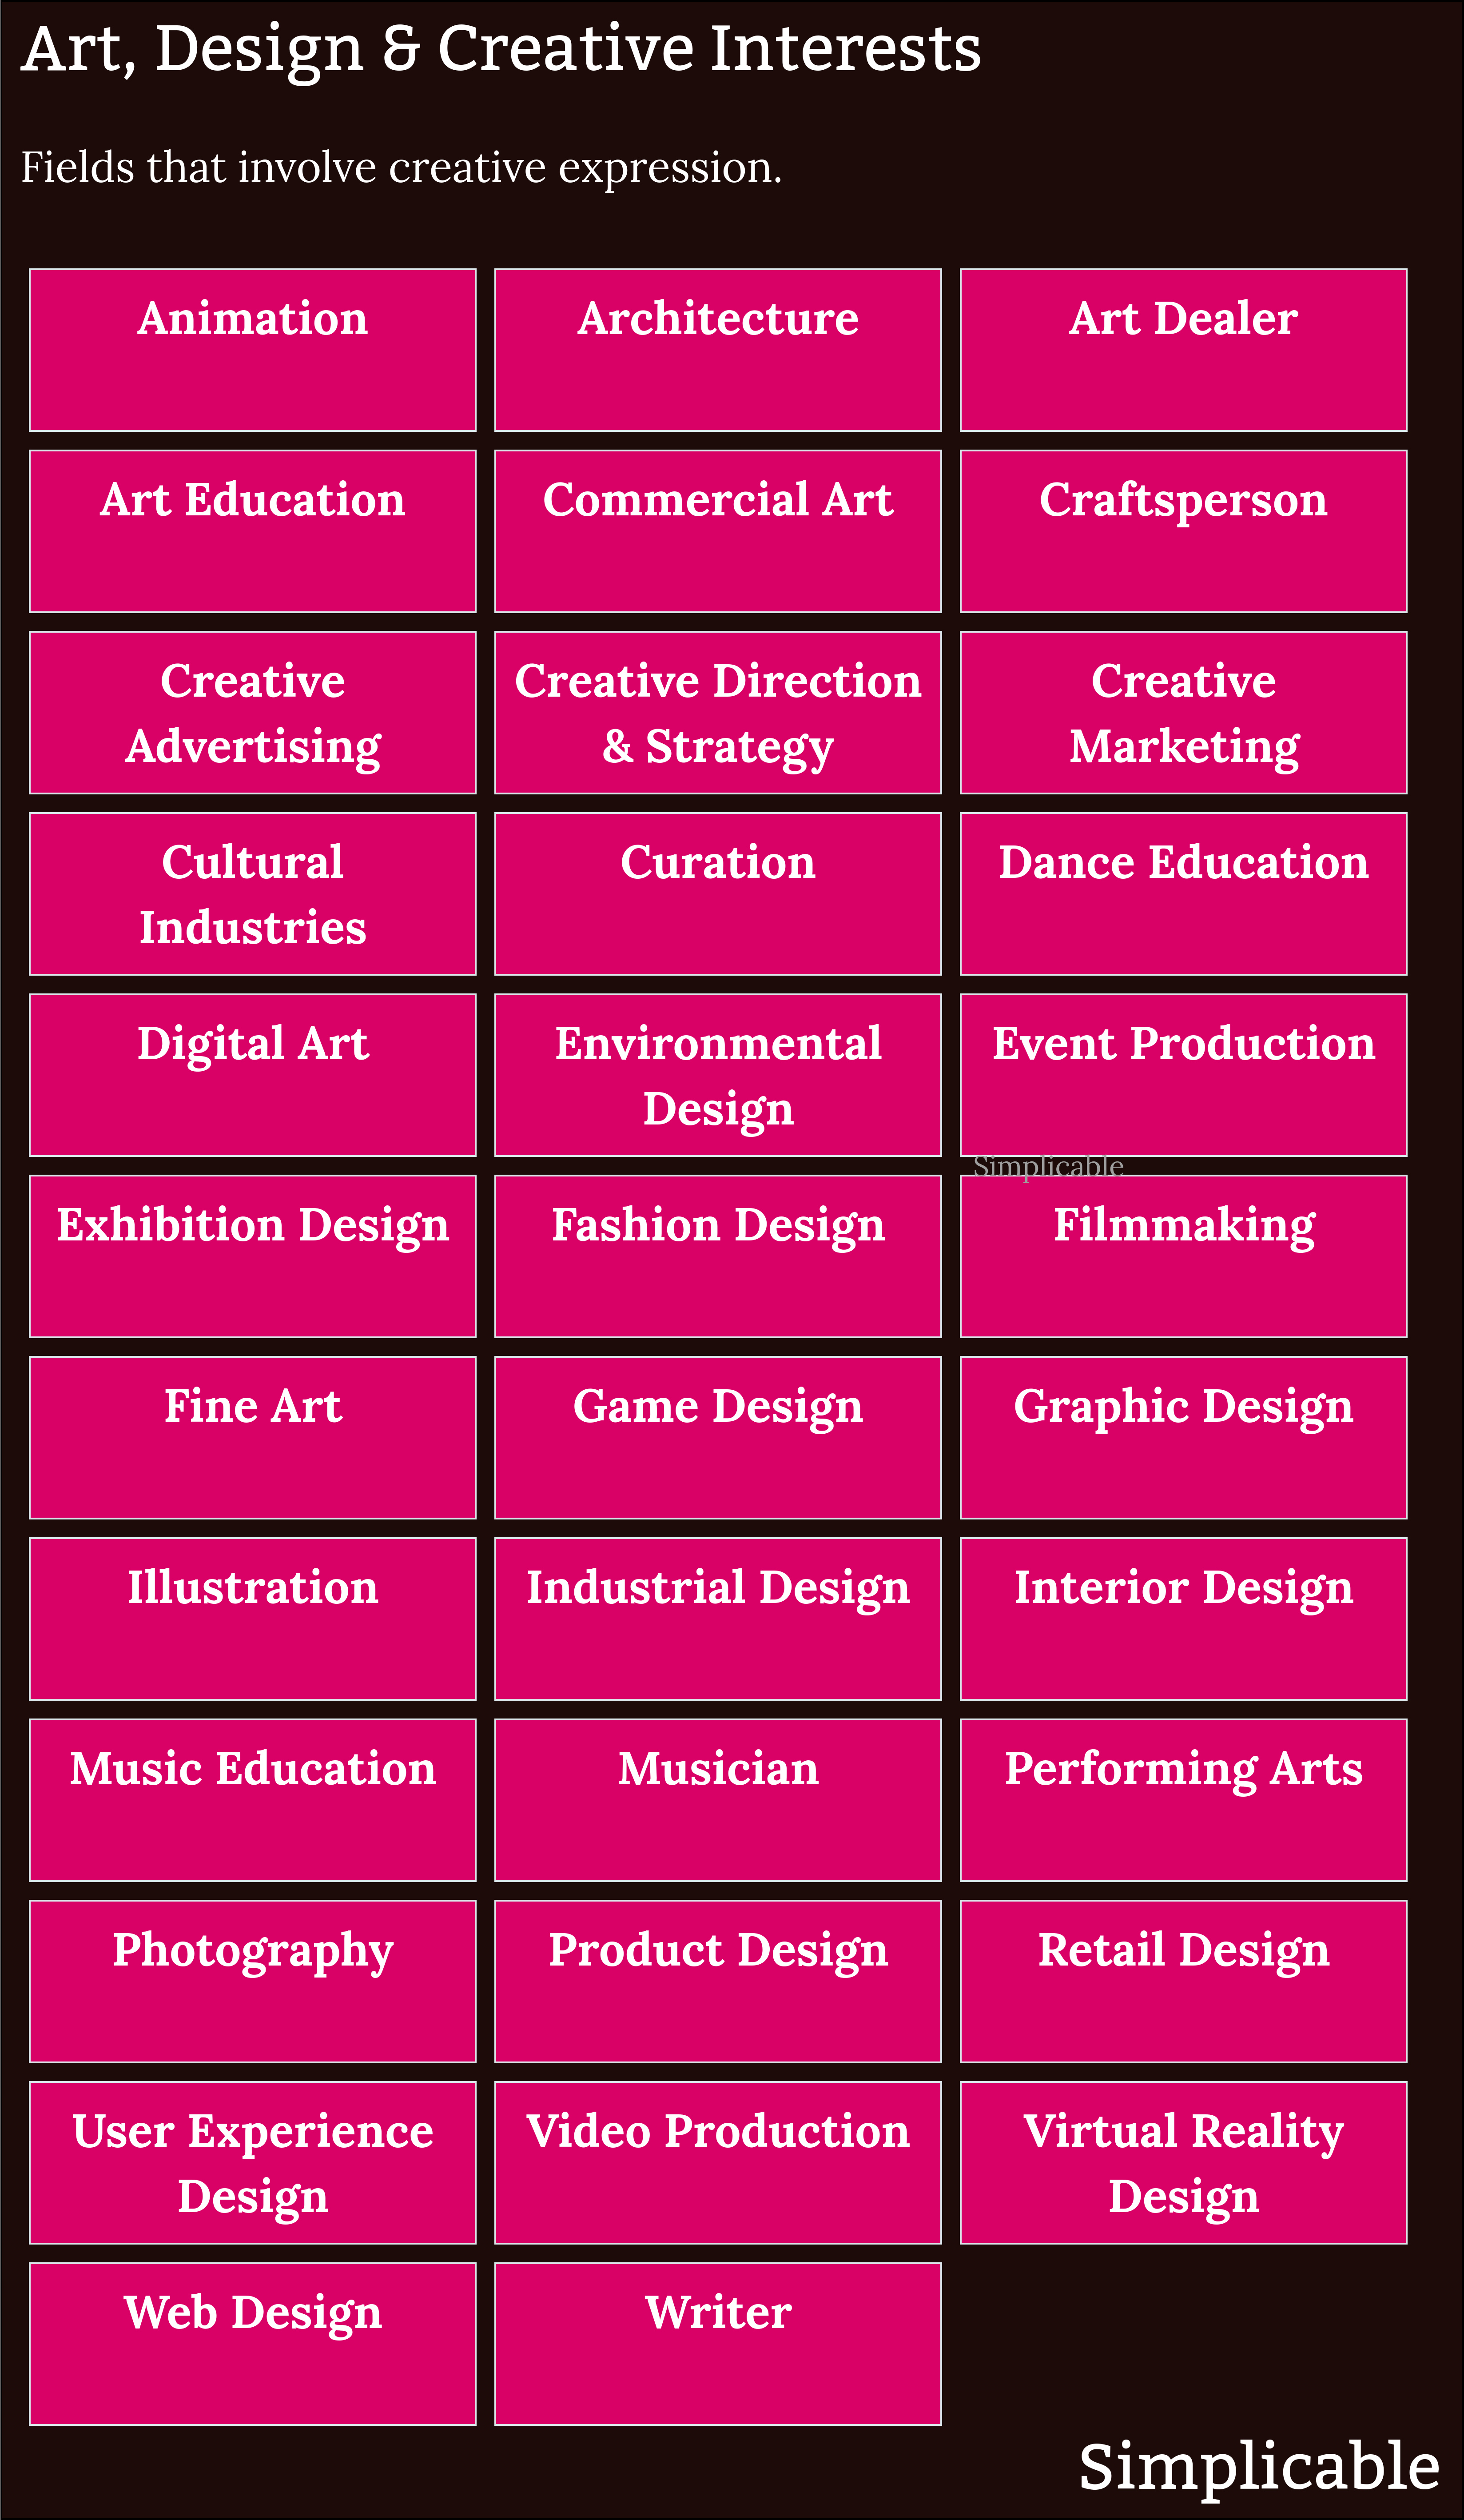 career interests art design and creative